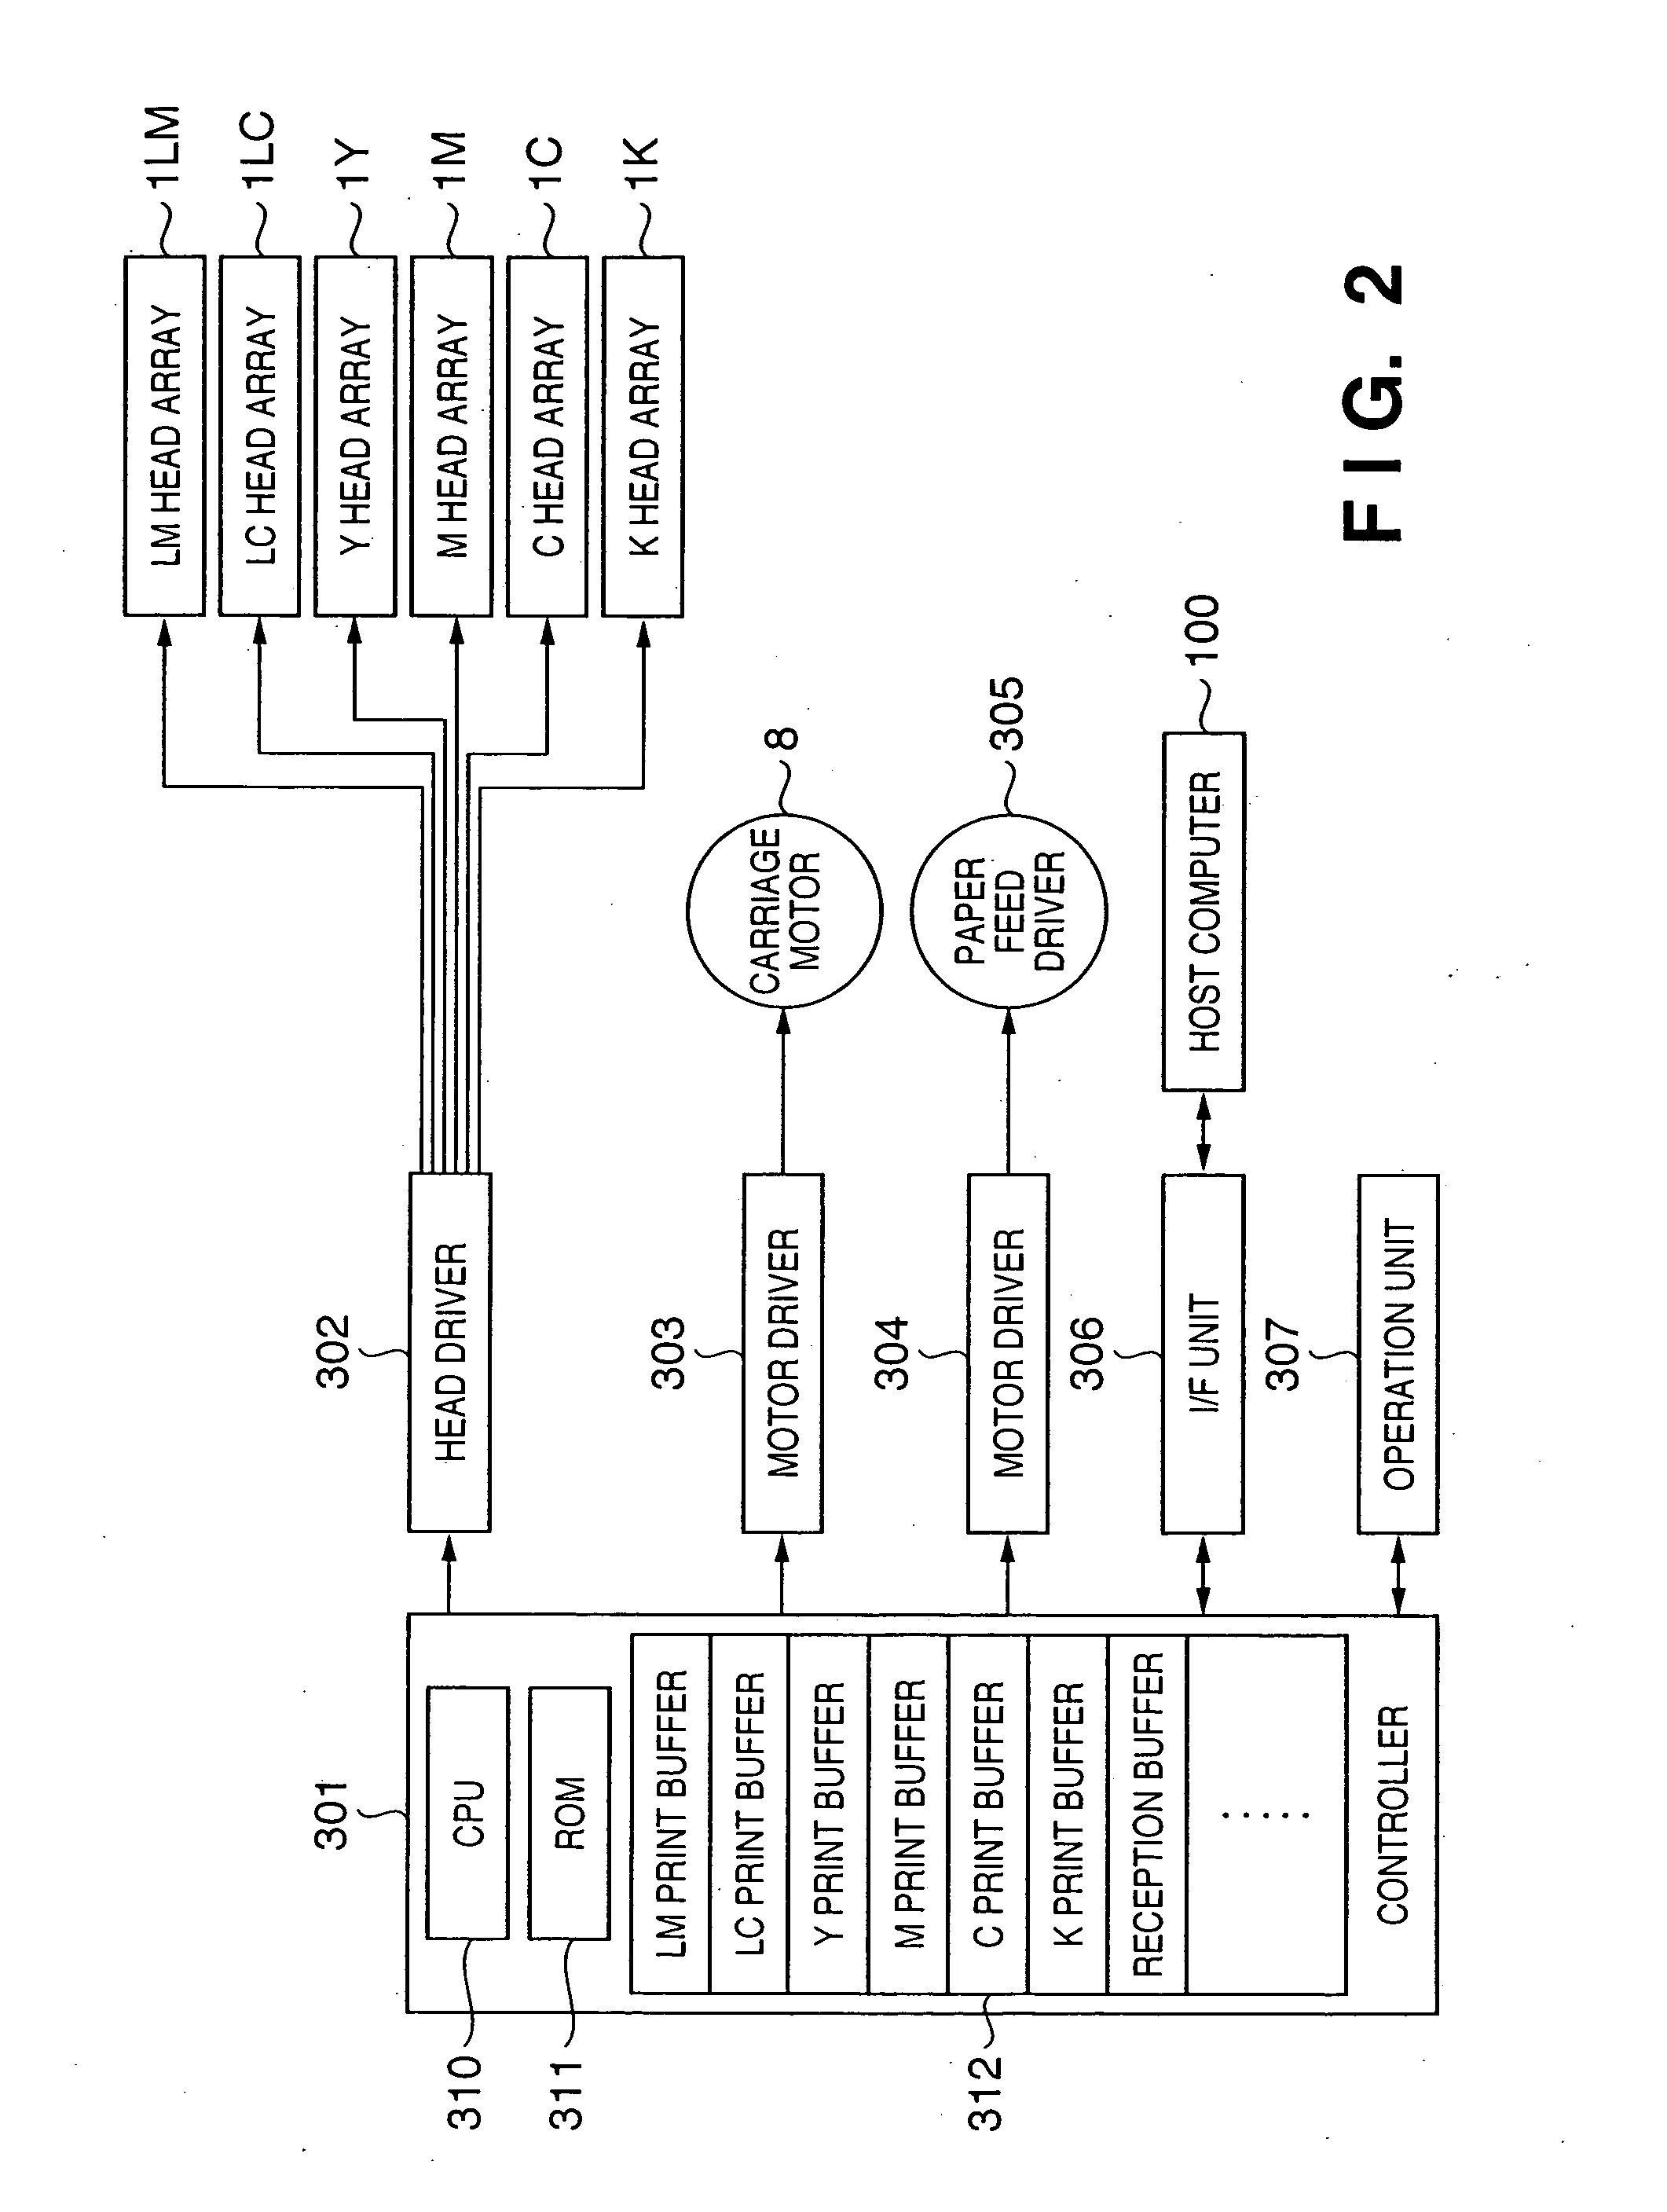 Color processing apparatus and its method, program, and printer driver